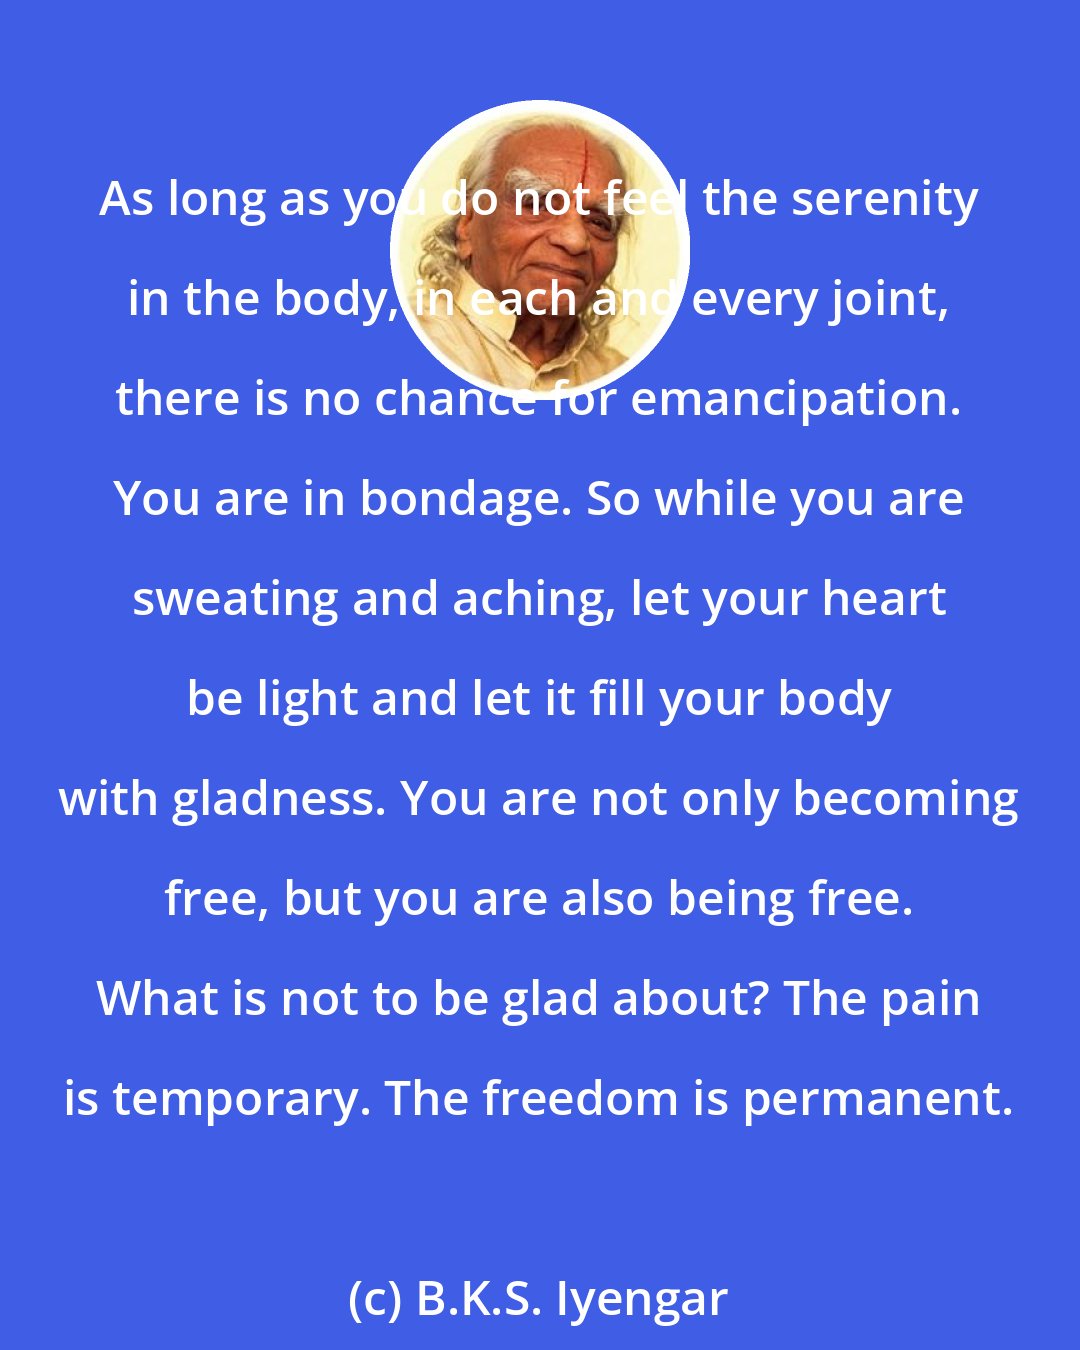 B.K.S. Iyengar: As long as you do not feel the serenity in the body, in each and every joint, there is no chance for emancipation. You are in bondage. So while you are sweating and aching, let your heart be light and let it fill your body with gladness. You are not only becoming free, but you are also being free. What is not to be glad about? The pain is temporary. The freedom is permanent.